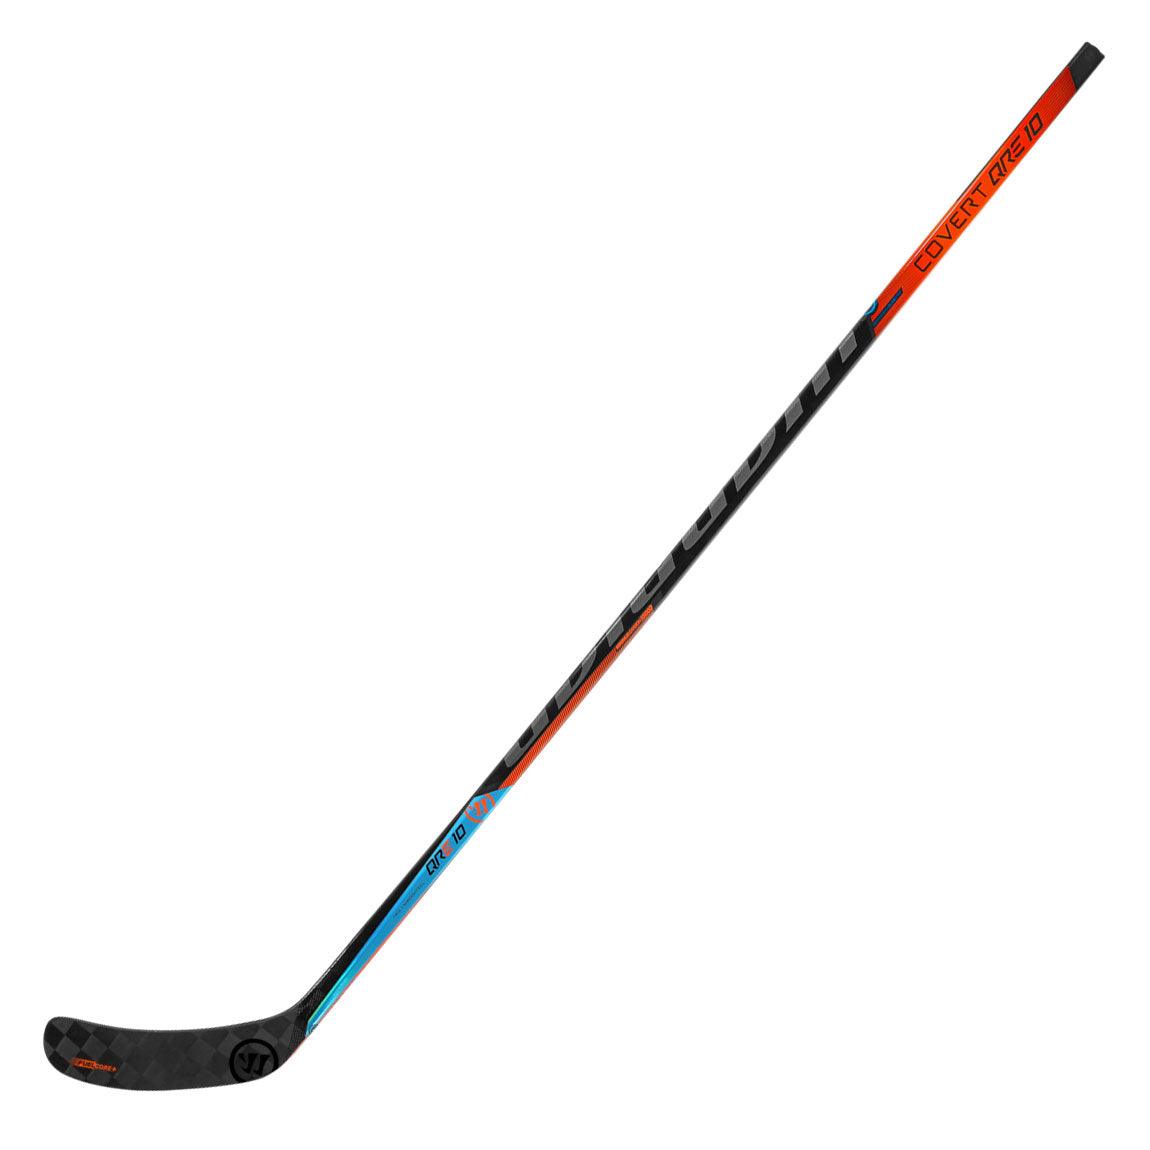 Covert QRE 10 (63") Hockey Stick - Senior - Sports Excellence